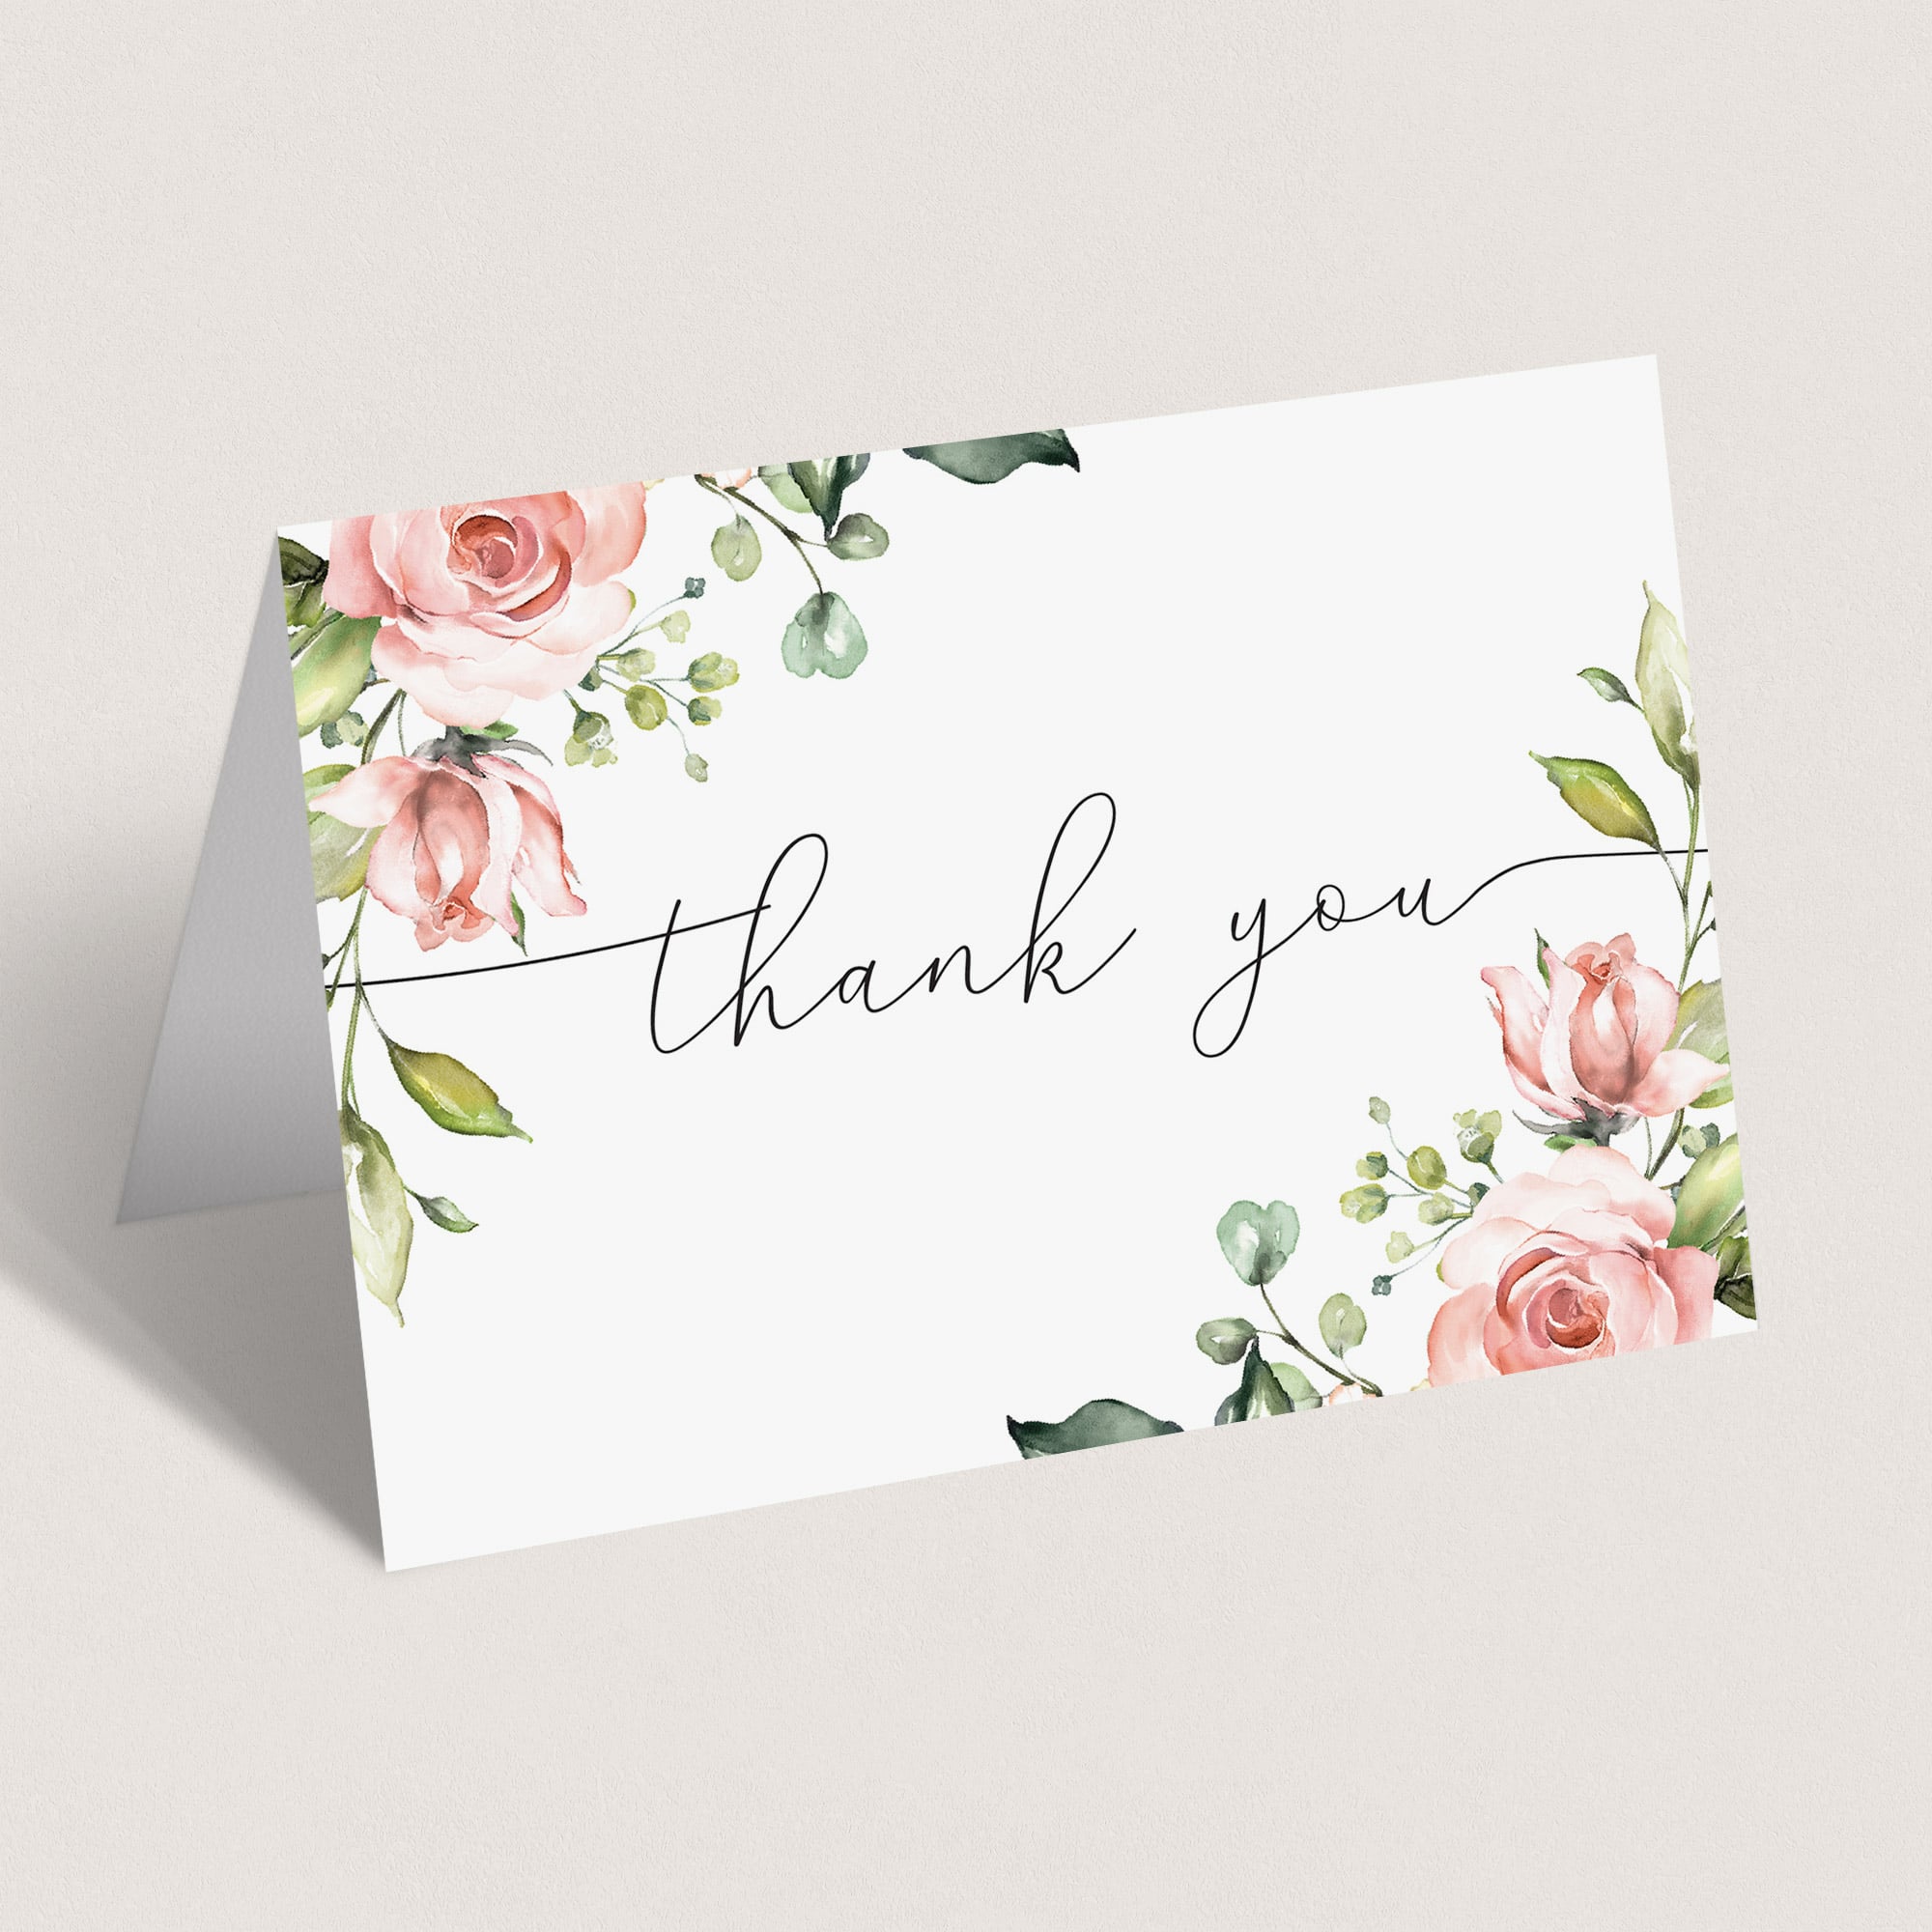 Download thank you cards watercolor flowers by LittleSizzle